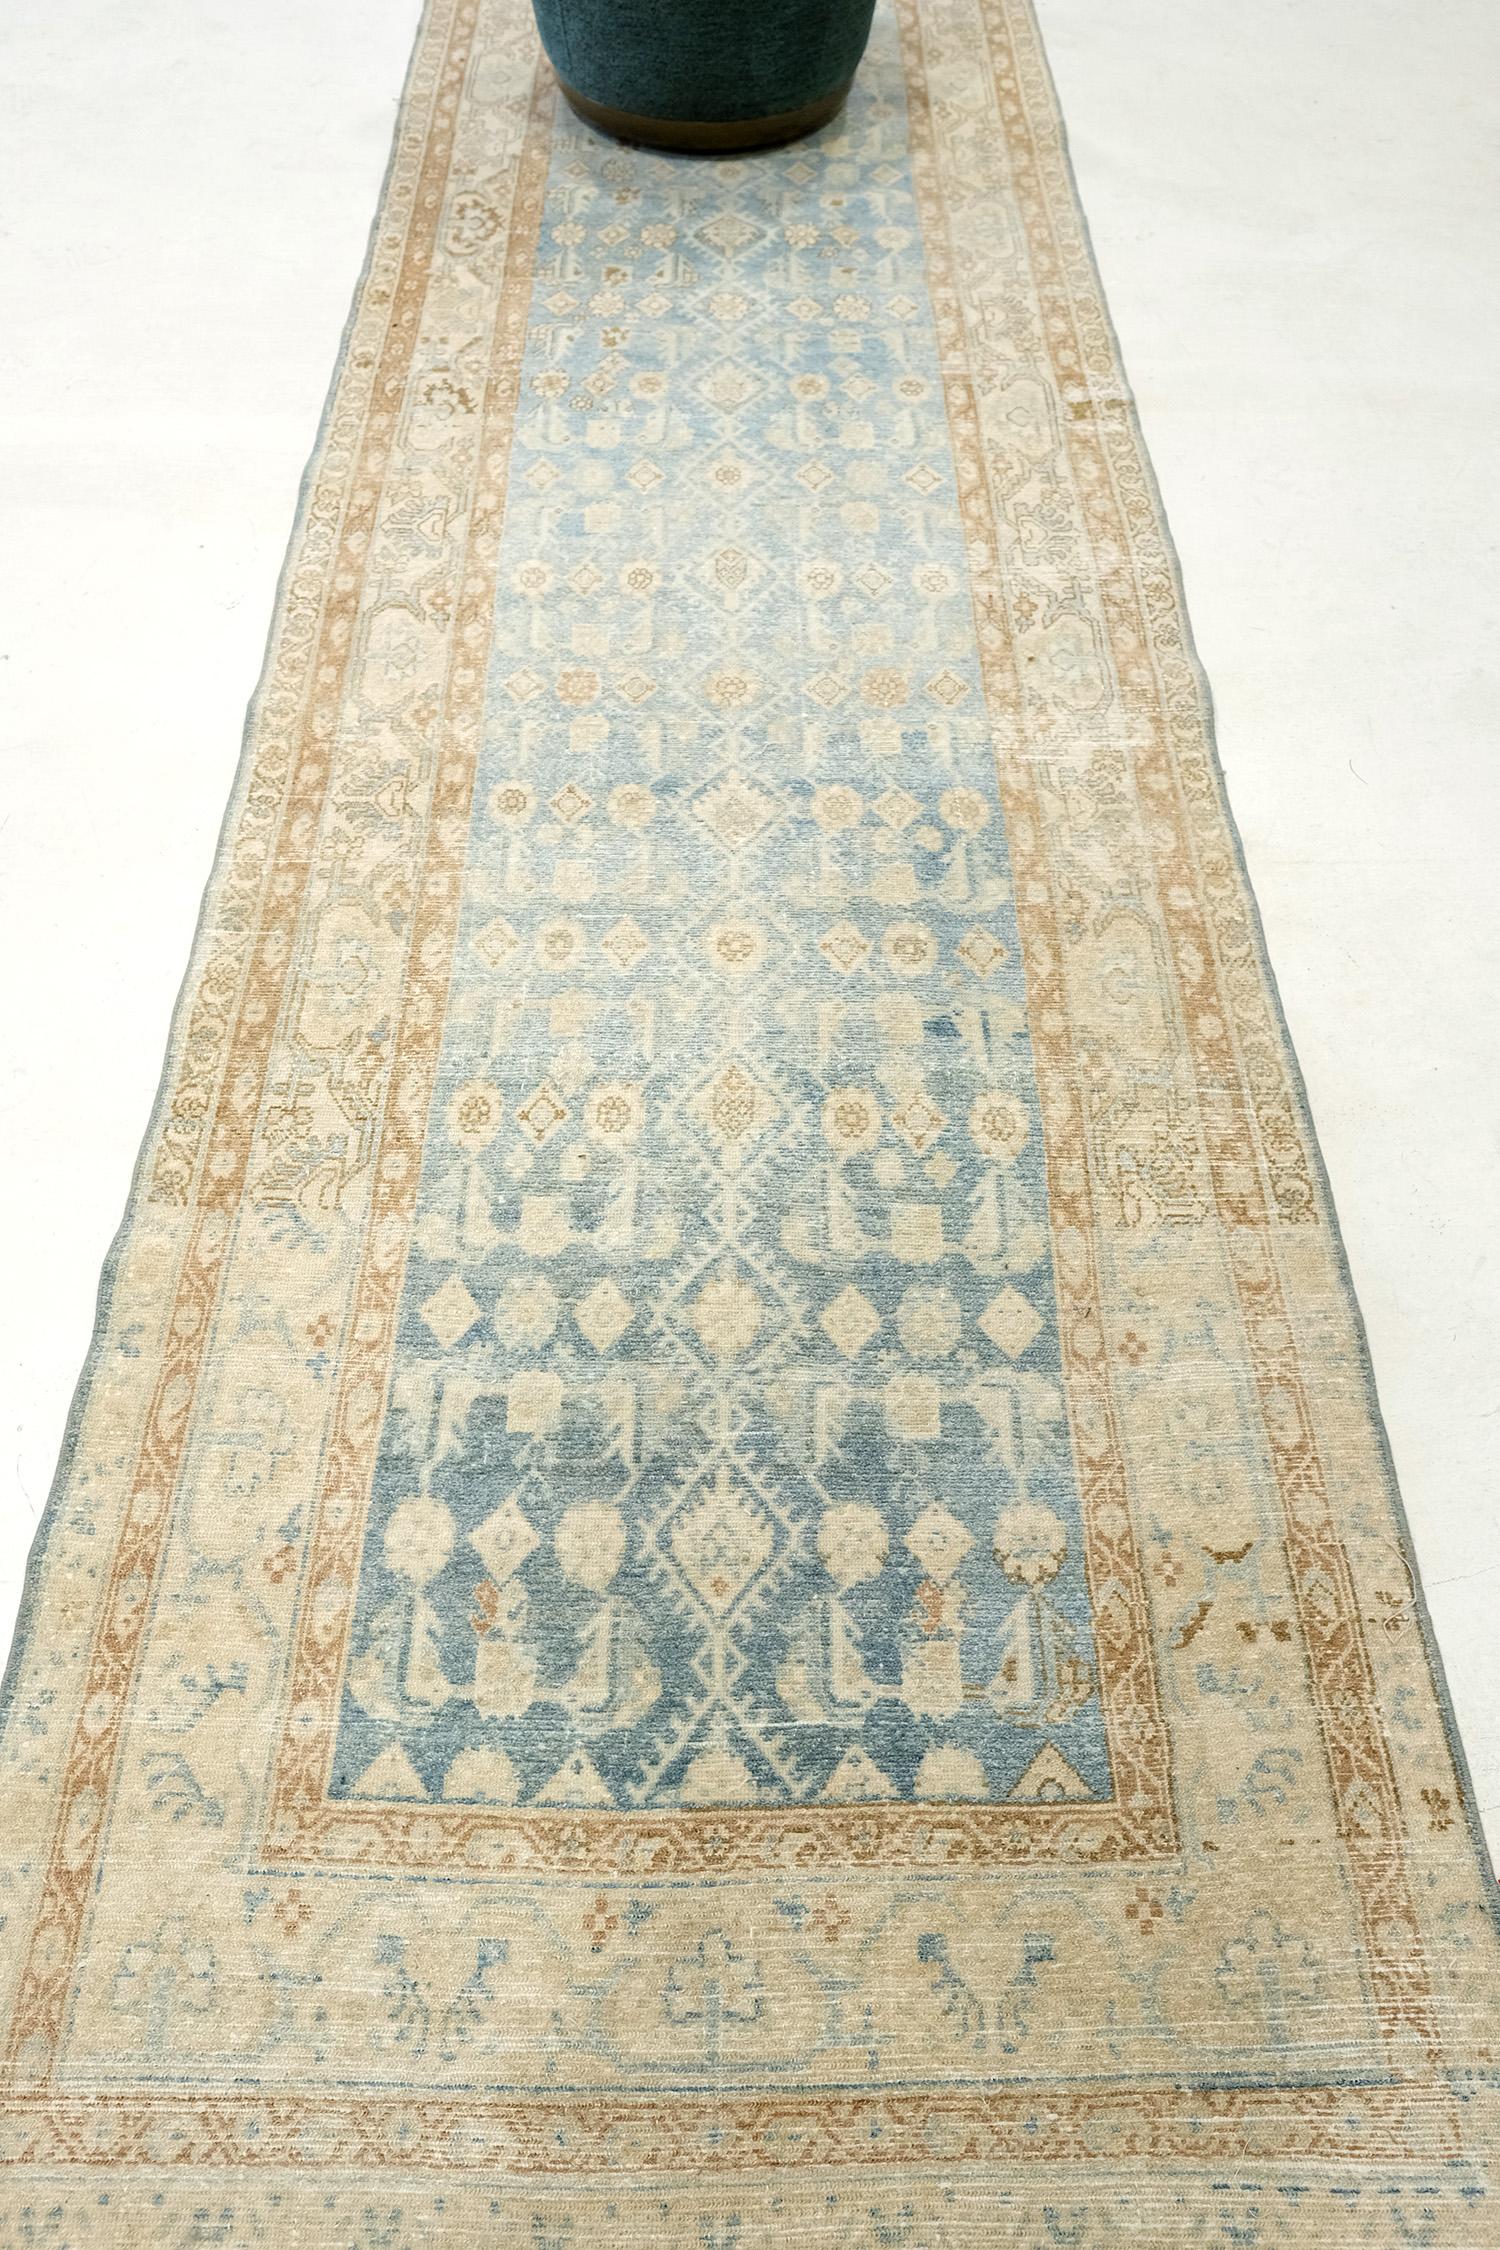 Behold and grab a glance at the charm of the Malayer runner from our sought-after antique collection. Tones of teal on its core and gold borders have featured the outline details of Persian symbols. Elegant diamonds are aligned at the main center